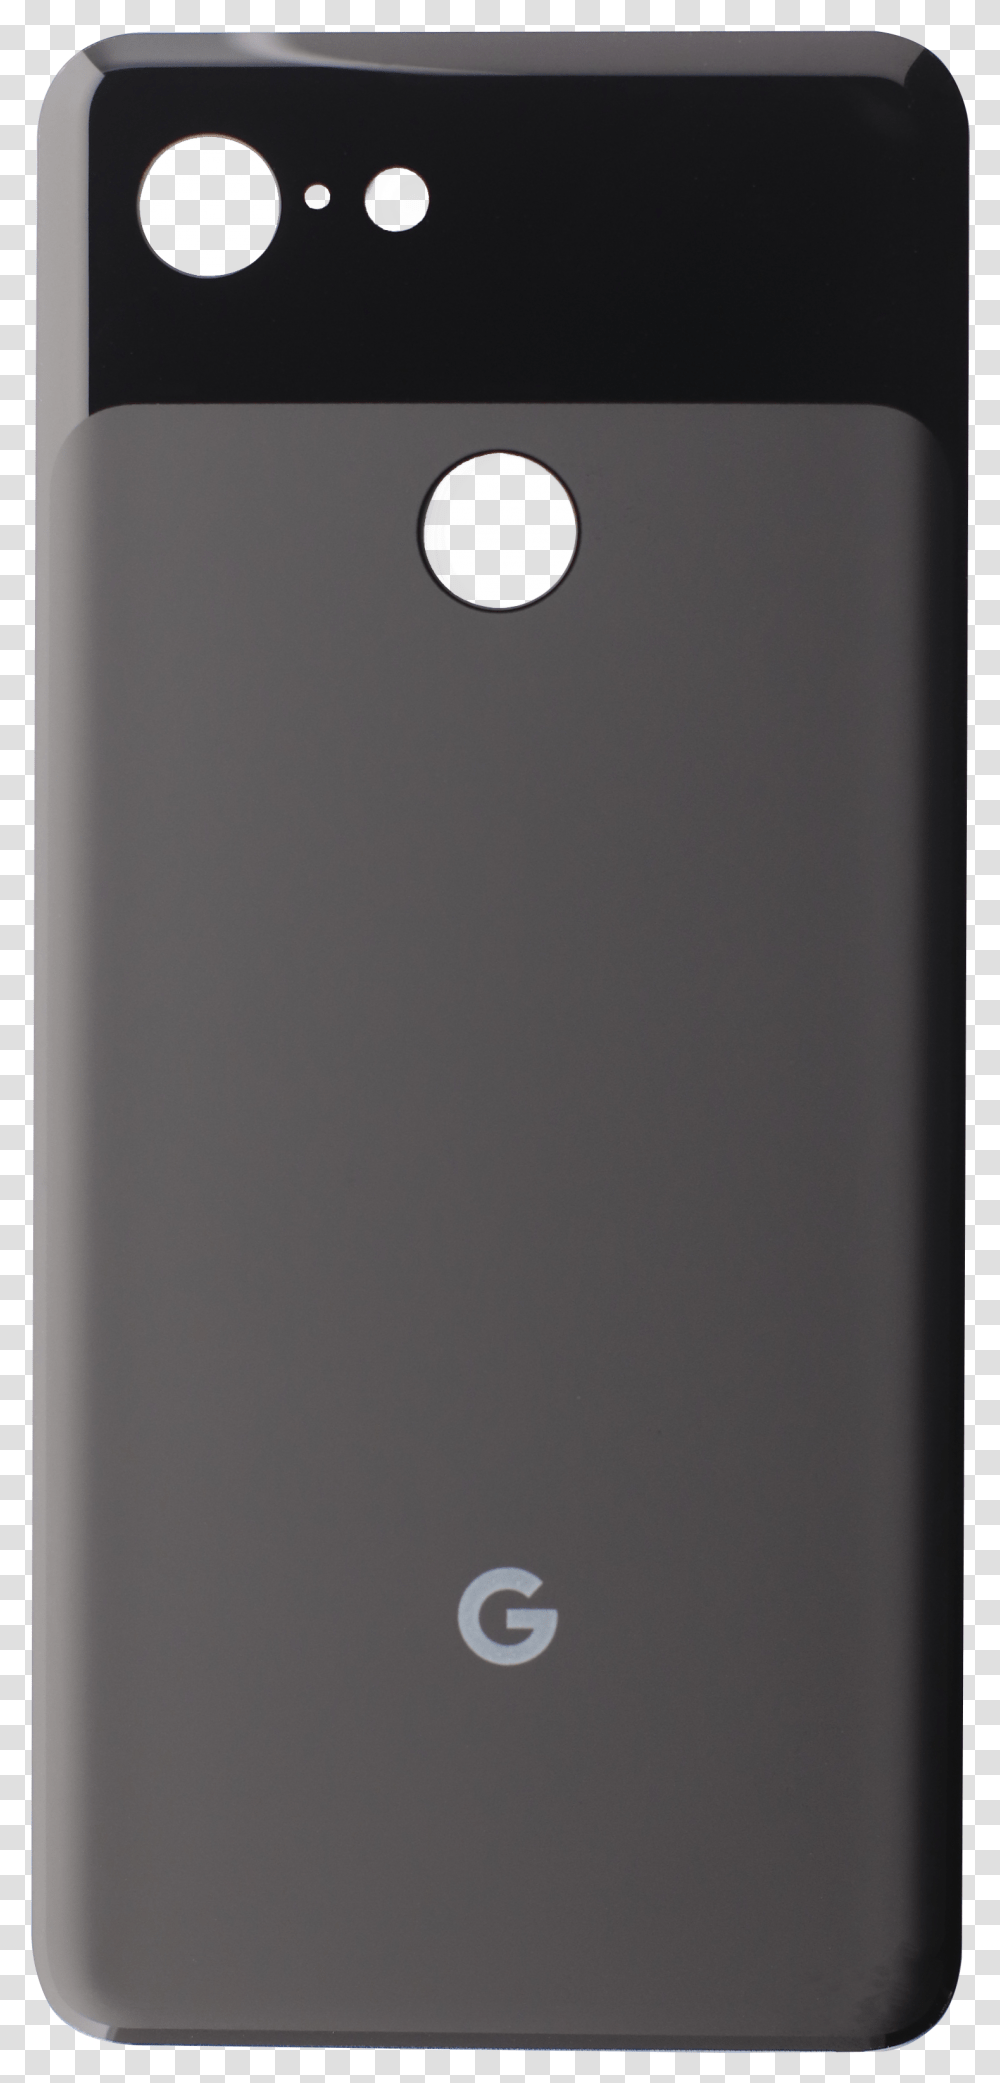 Back Glass For Use With Google Pixel 3 Smartphone, Mobile Phone, Electronics, Cell Phone, Iphone Transparent Png